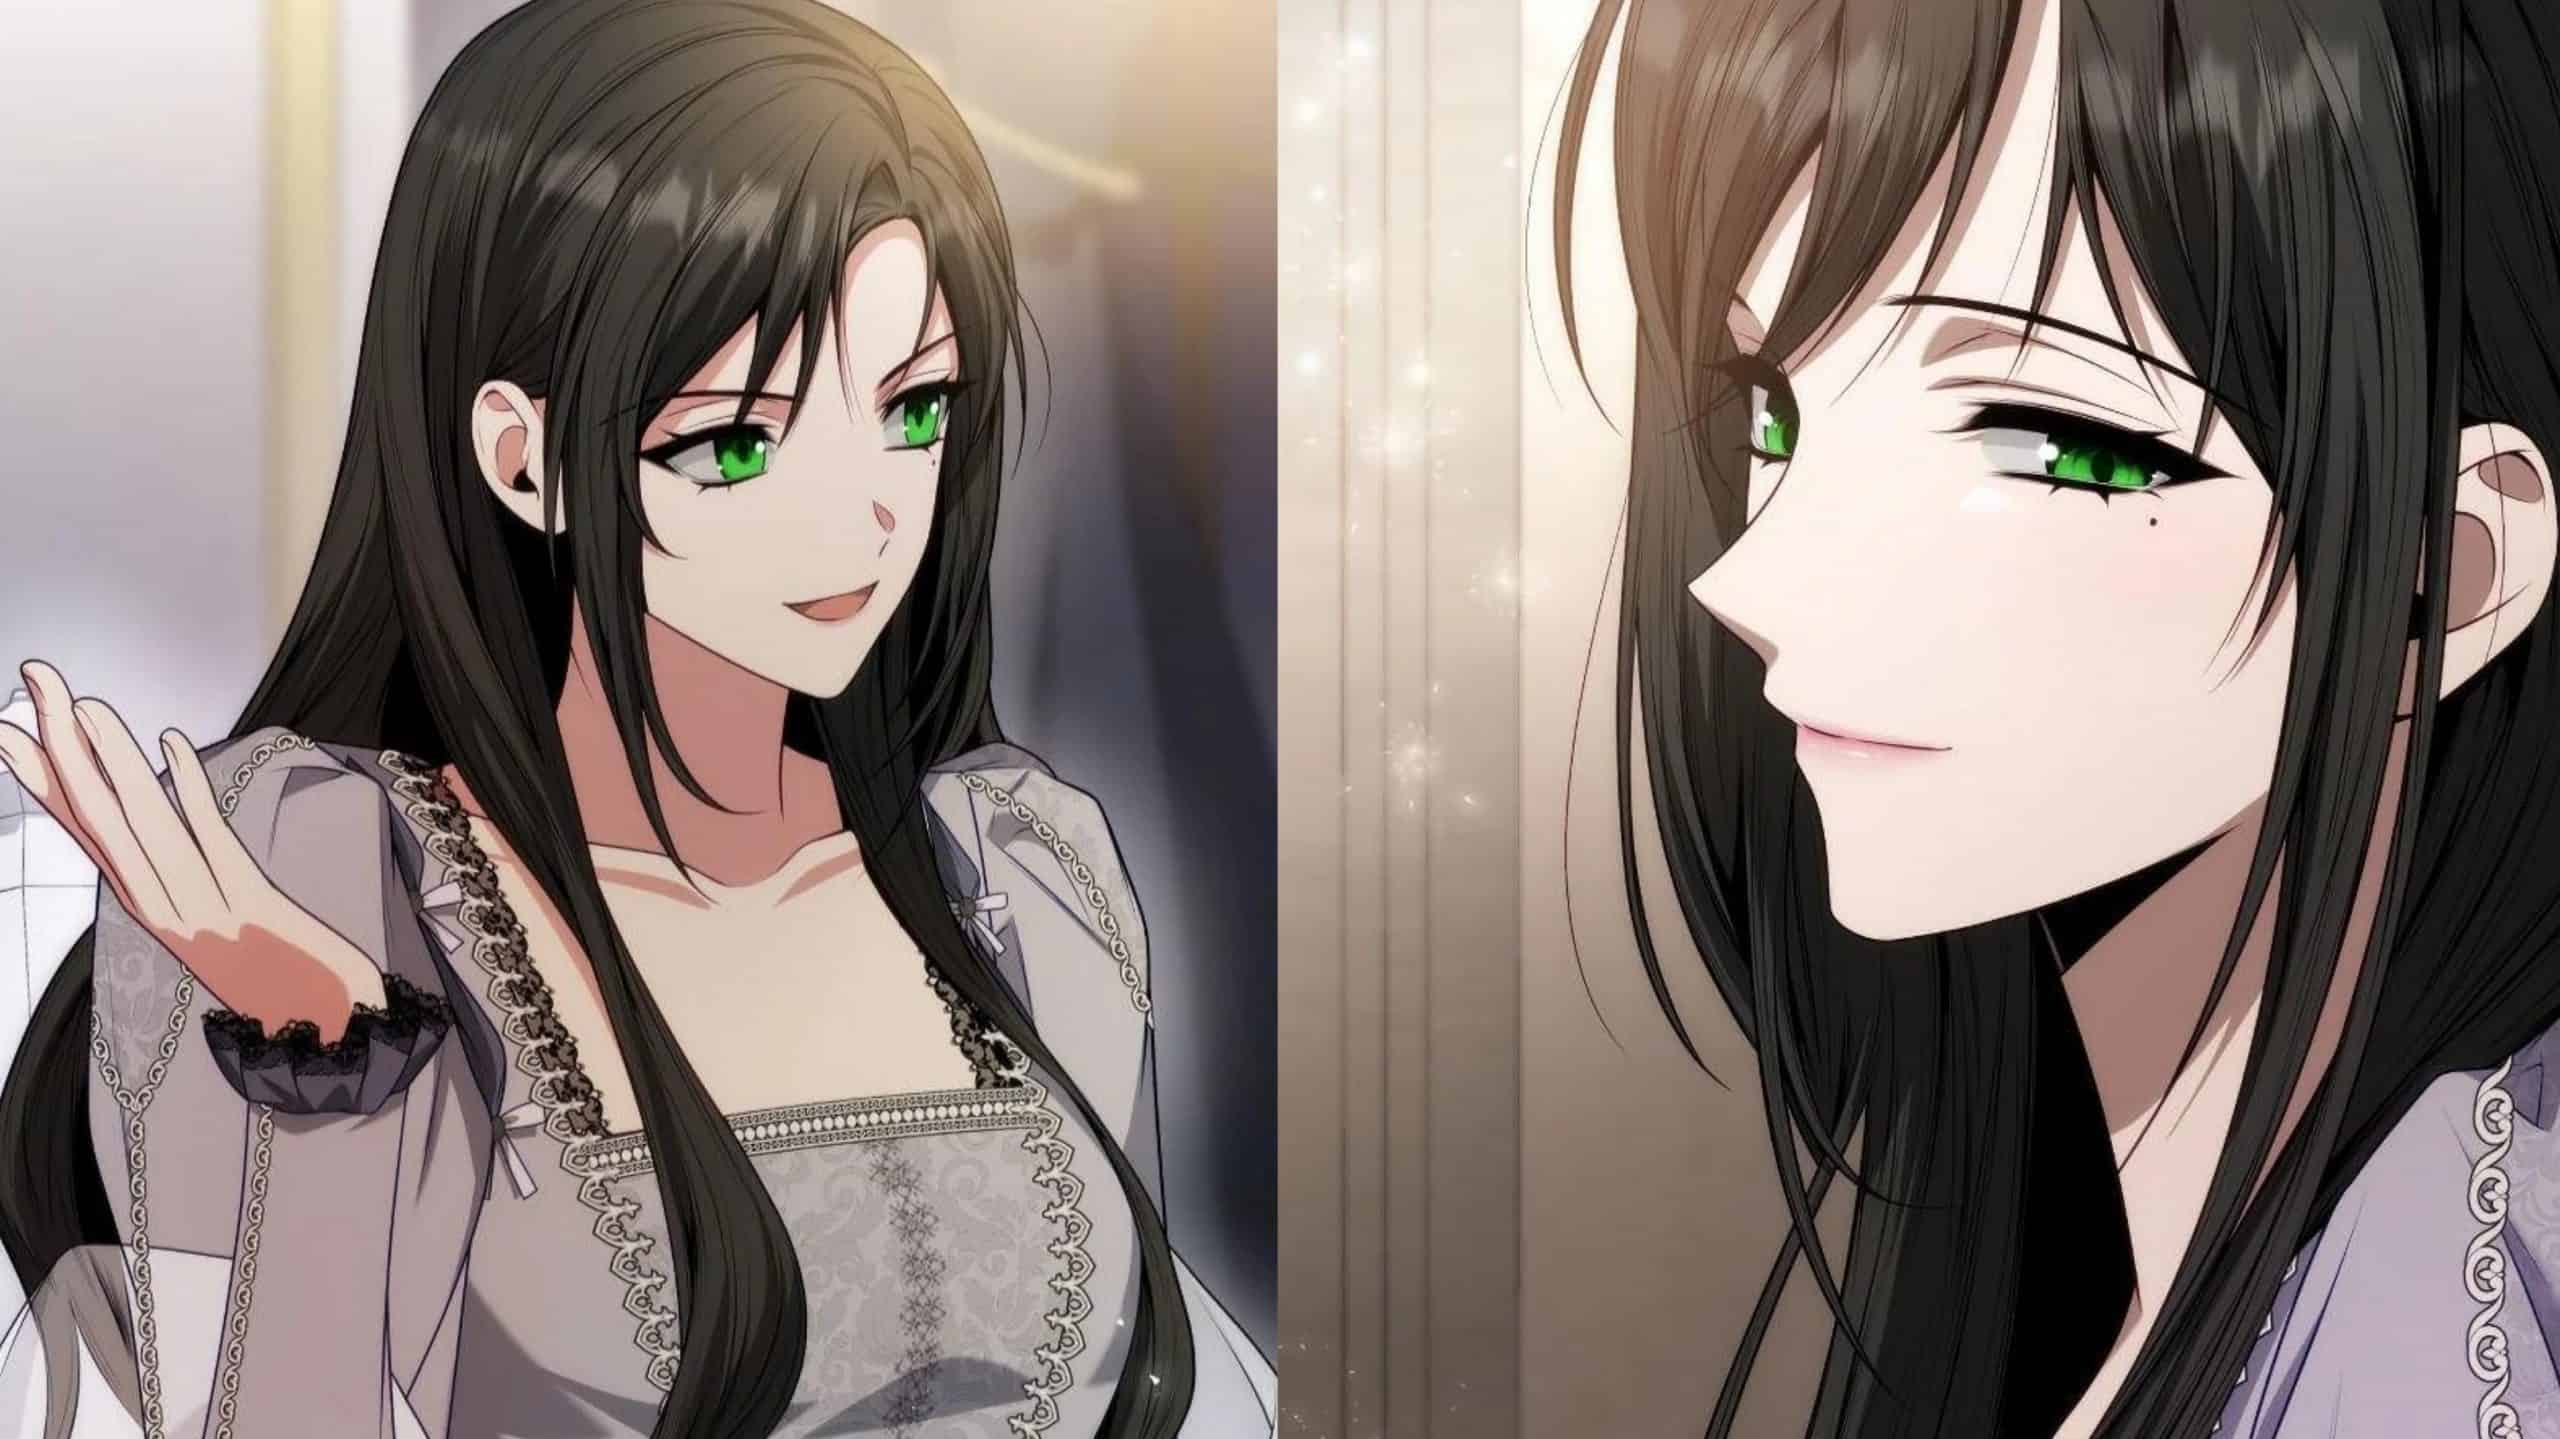 Sister, I Am The Queen In This Life Chapter 48 Release Date